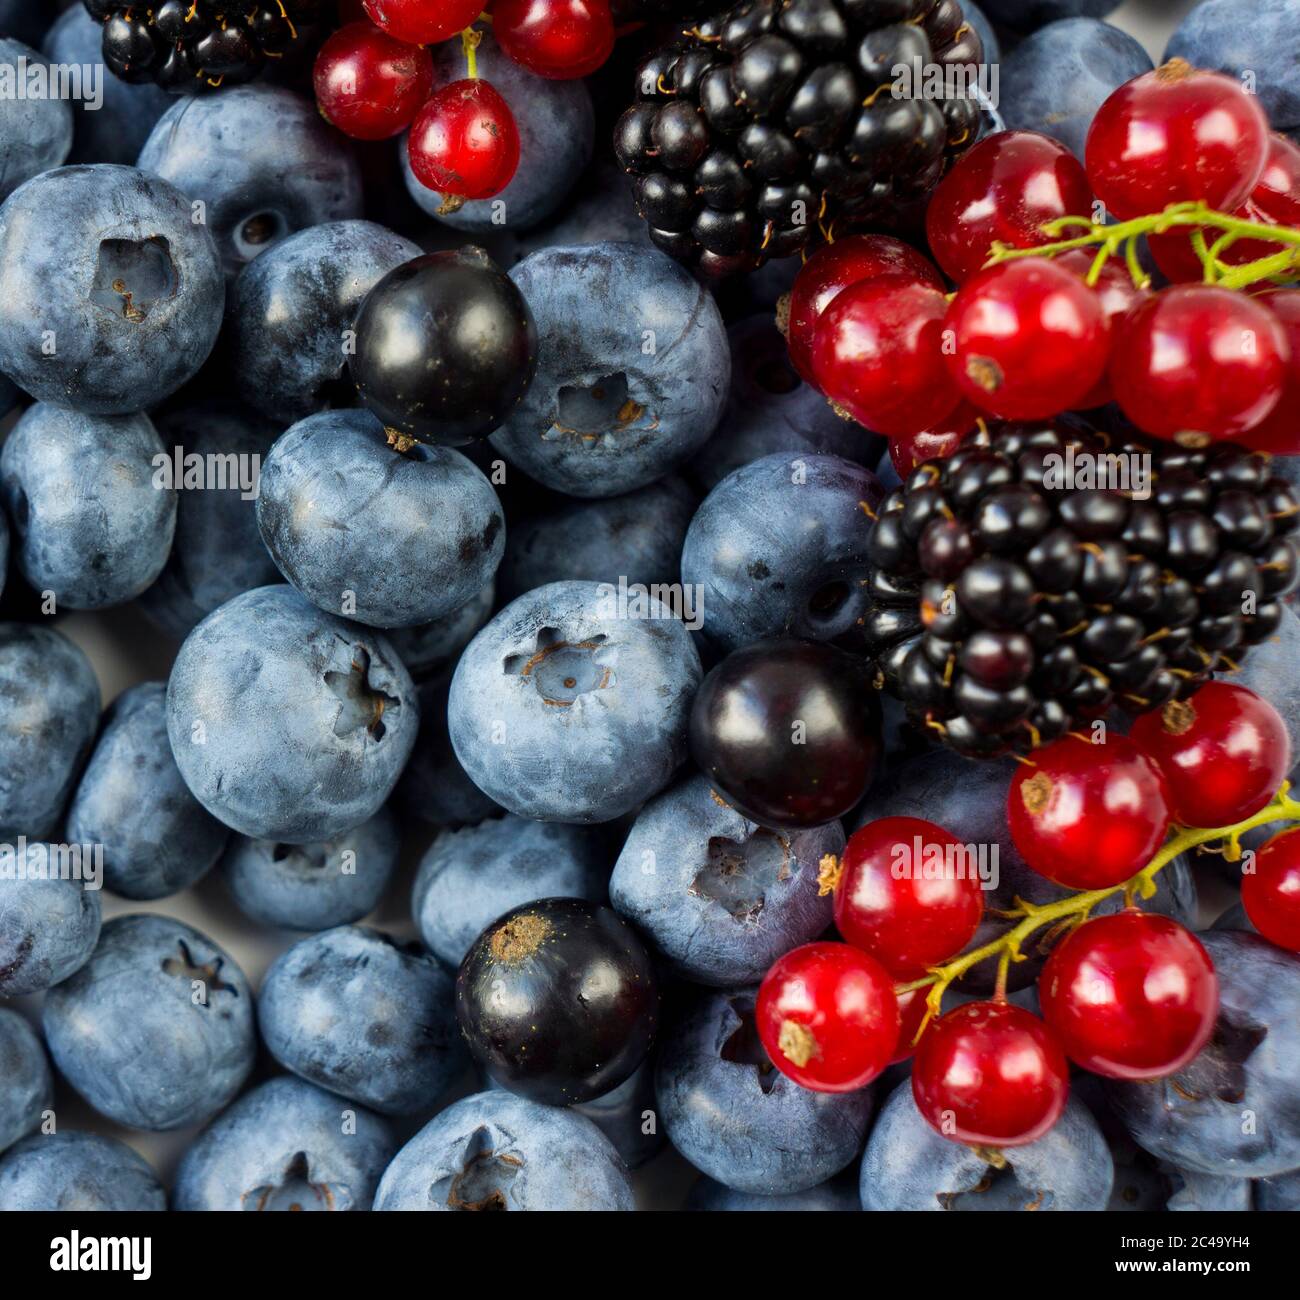 Mix berries and fruits. Ripe blackberries, blueberries, blackcurrants, red currants. Top view. Background berries and fruits. Various fresh summer fru Stock Photo